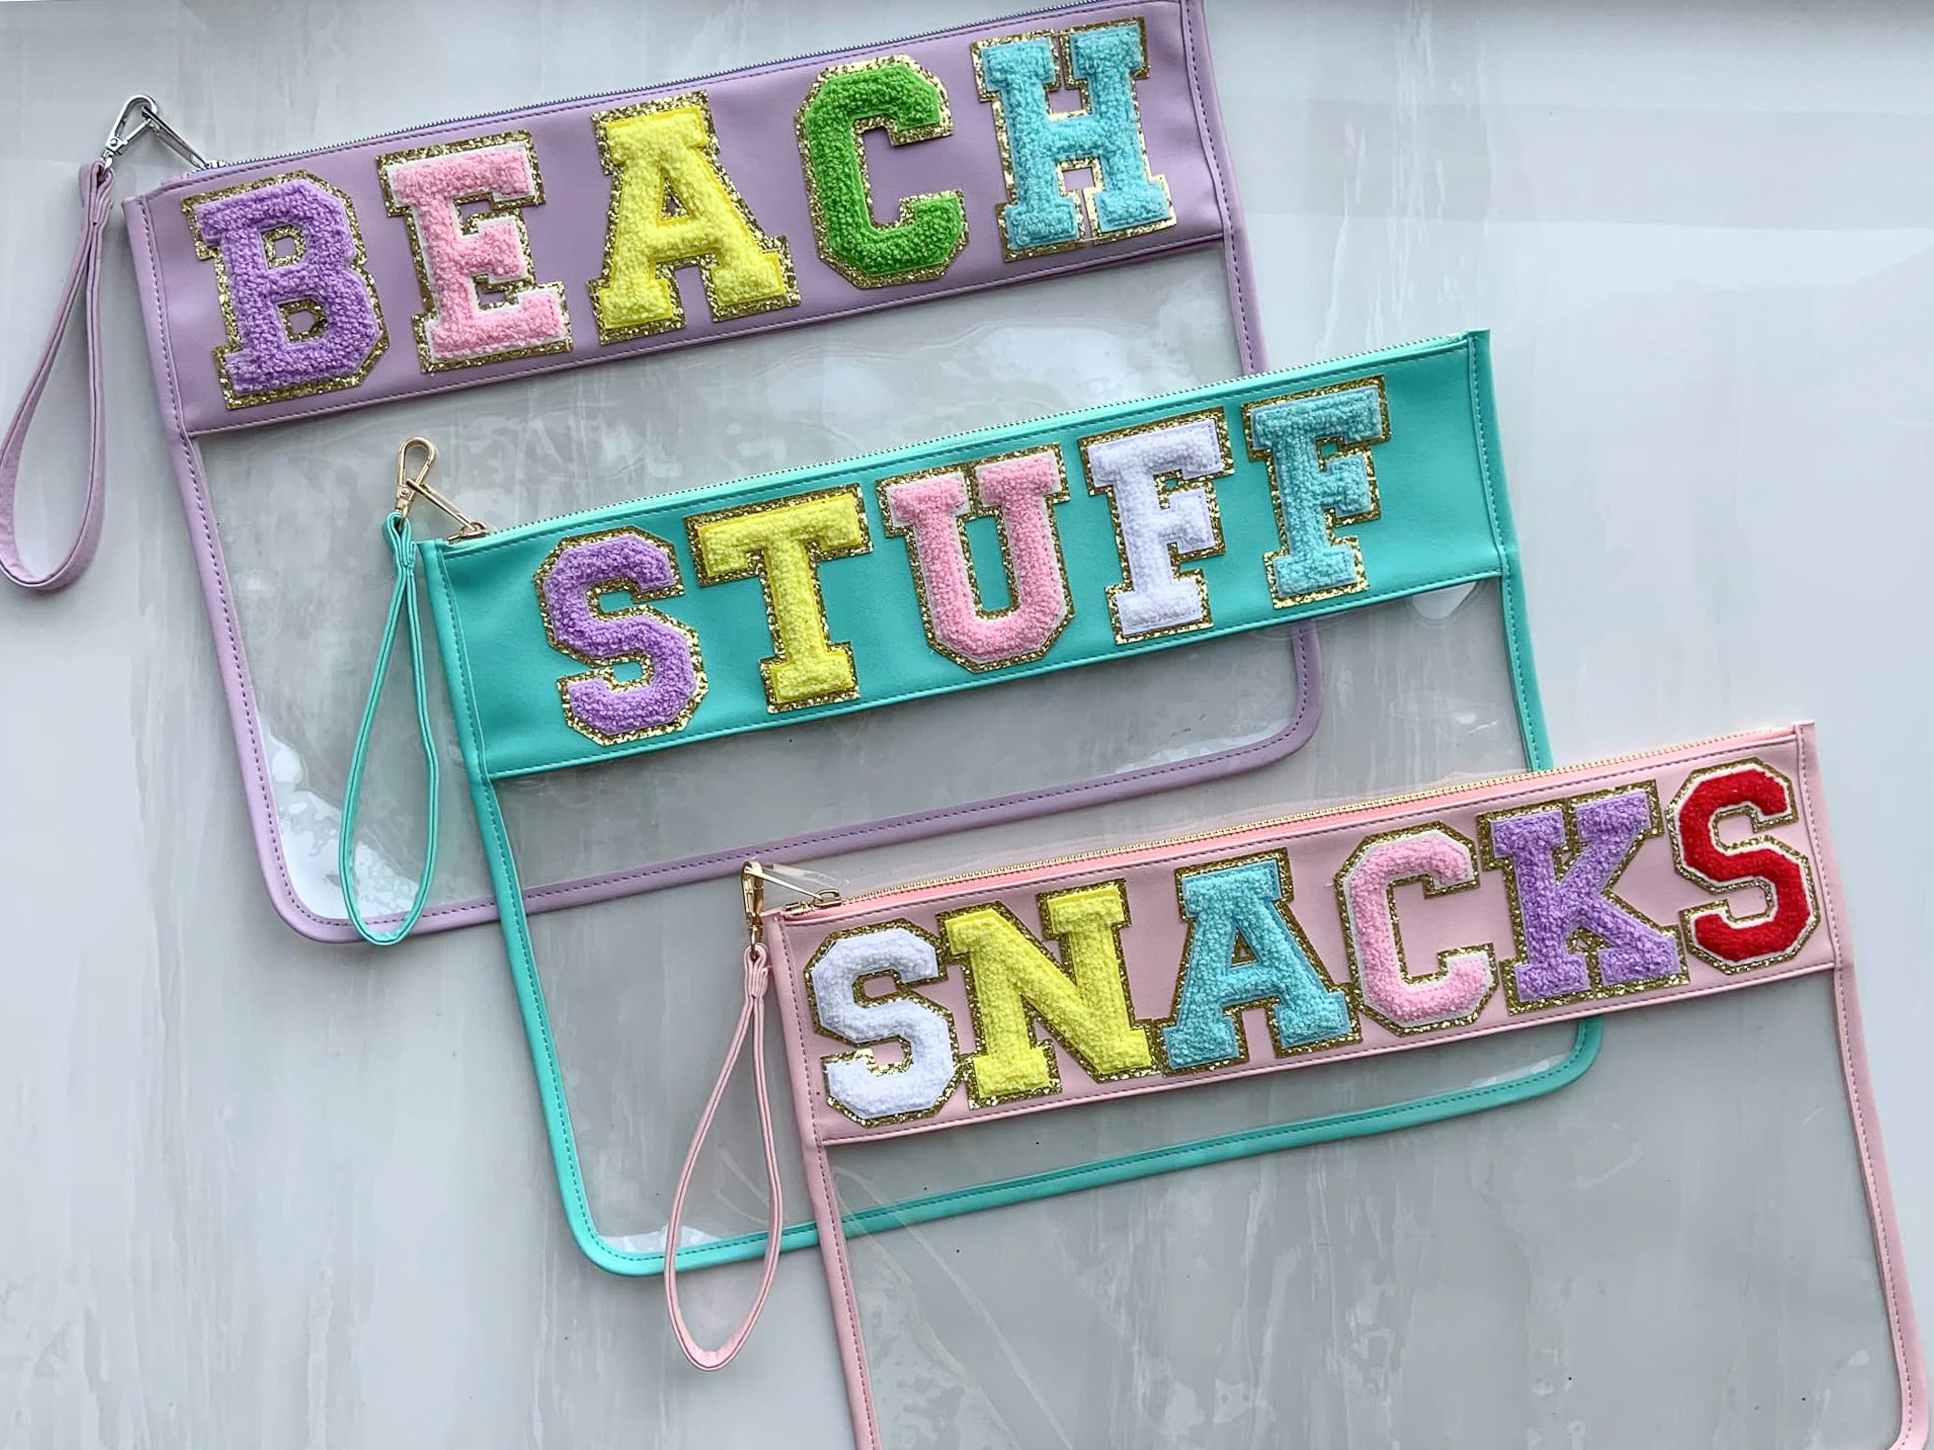 Three clear pouches customized with letter patches to say "Beach", "Stuff", and "Snacks" lying together on a marble counter.